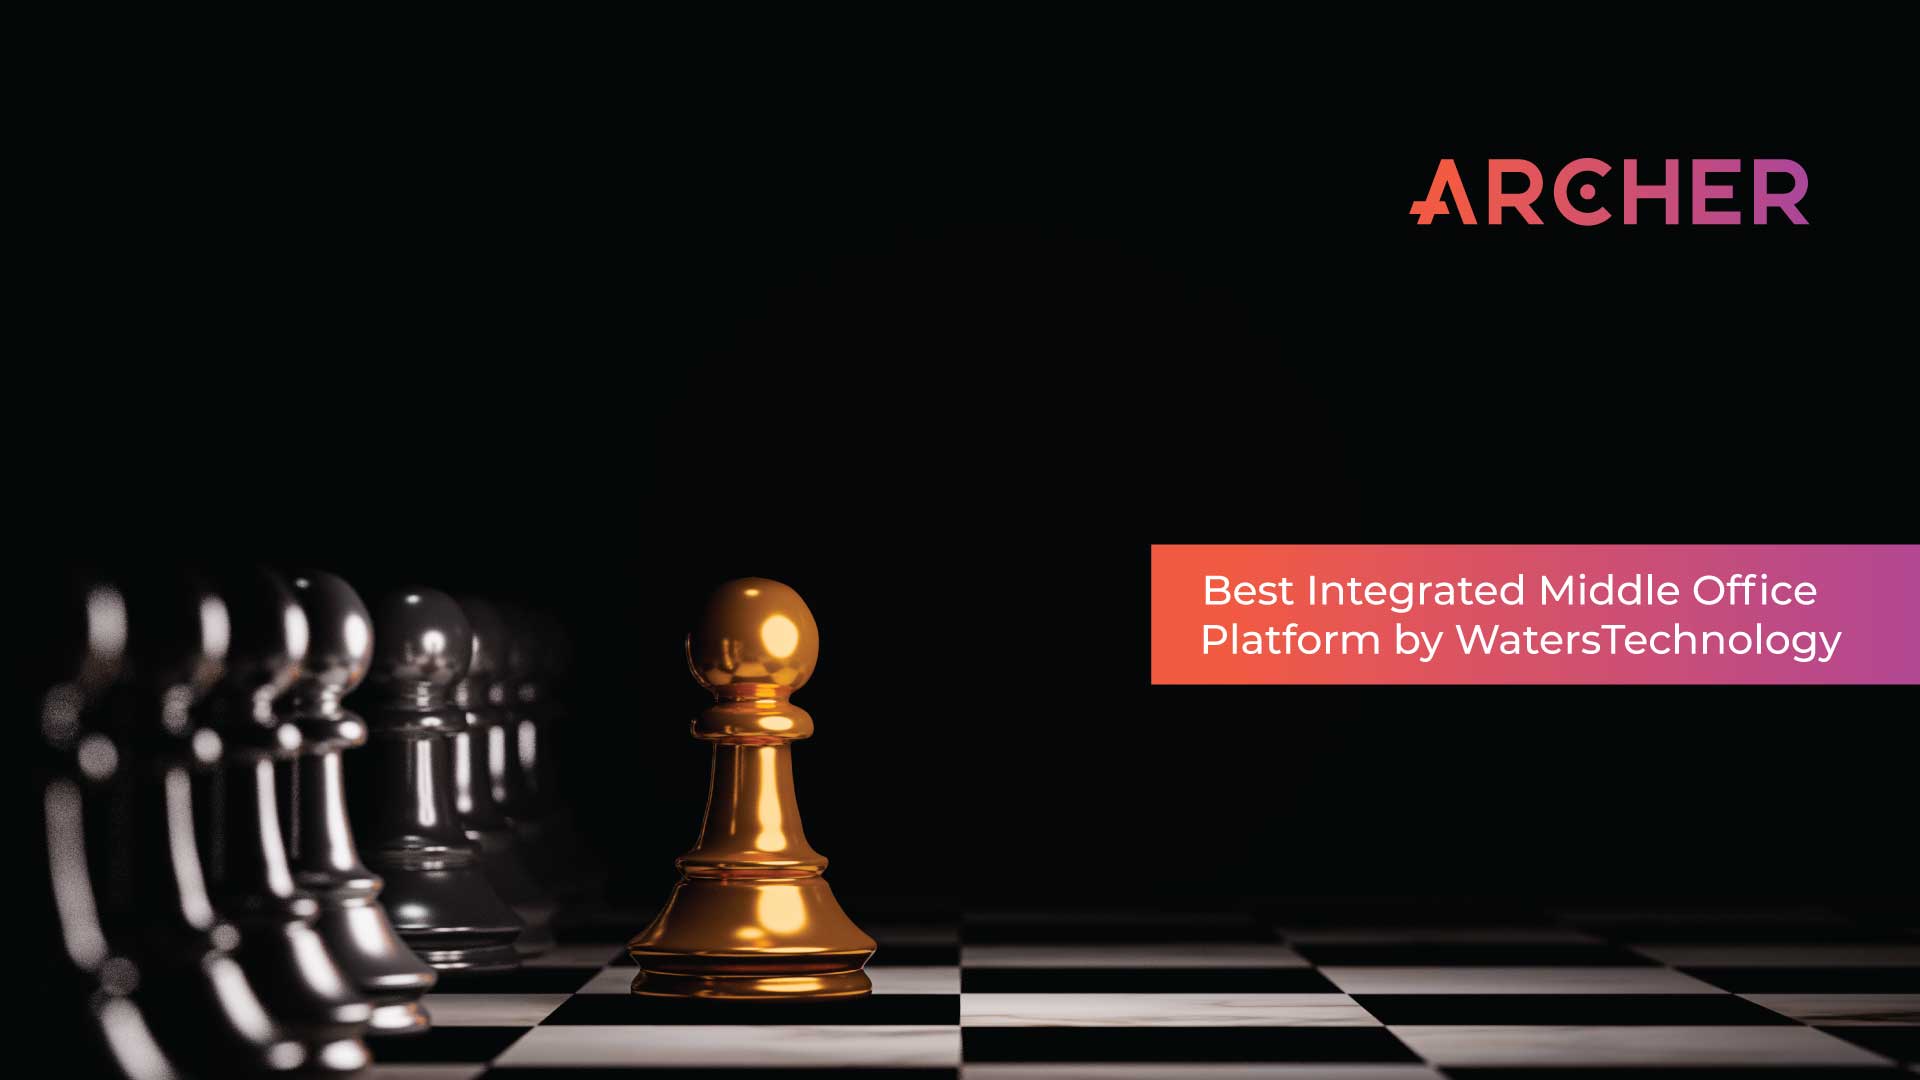 Archer Named Best Integrated Middle Office Platform by WatersTechnology